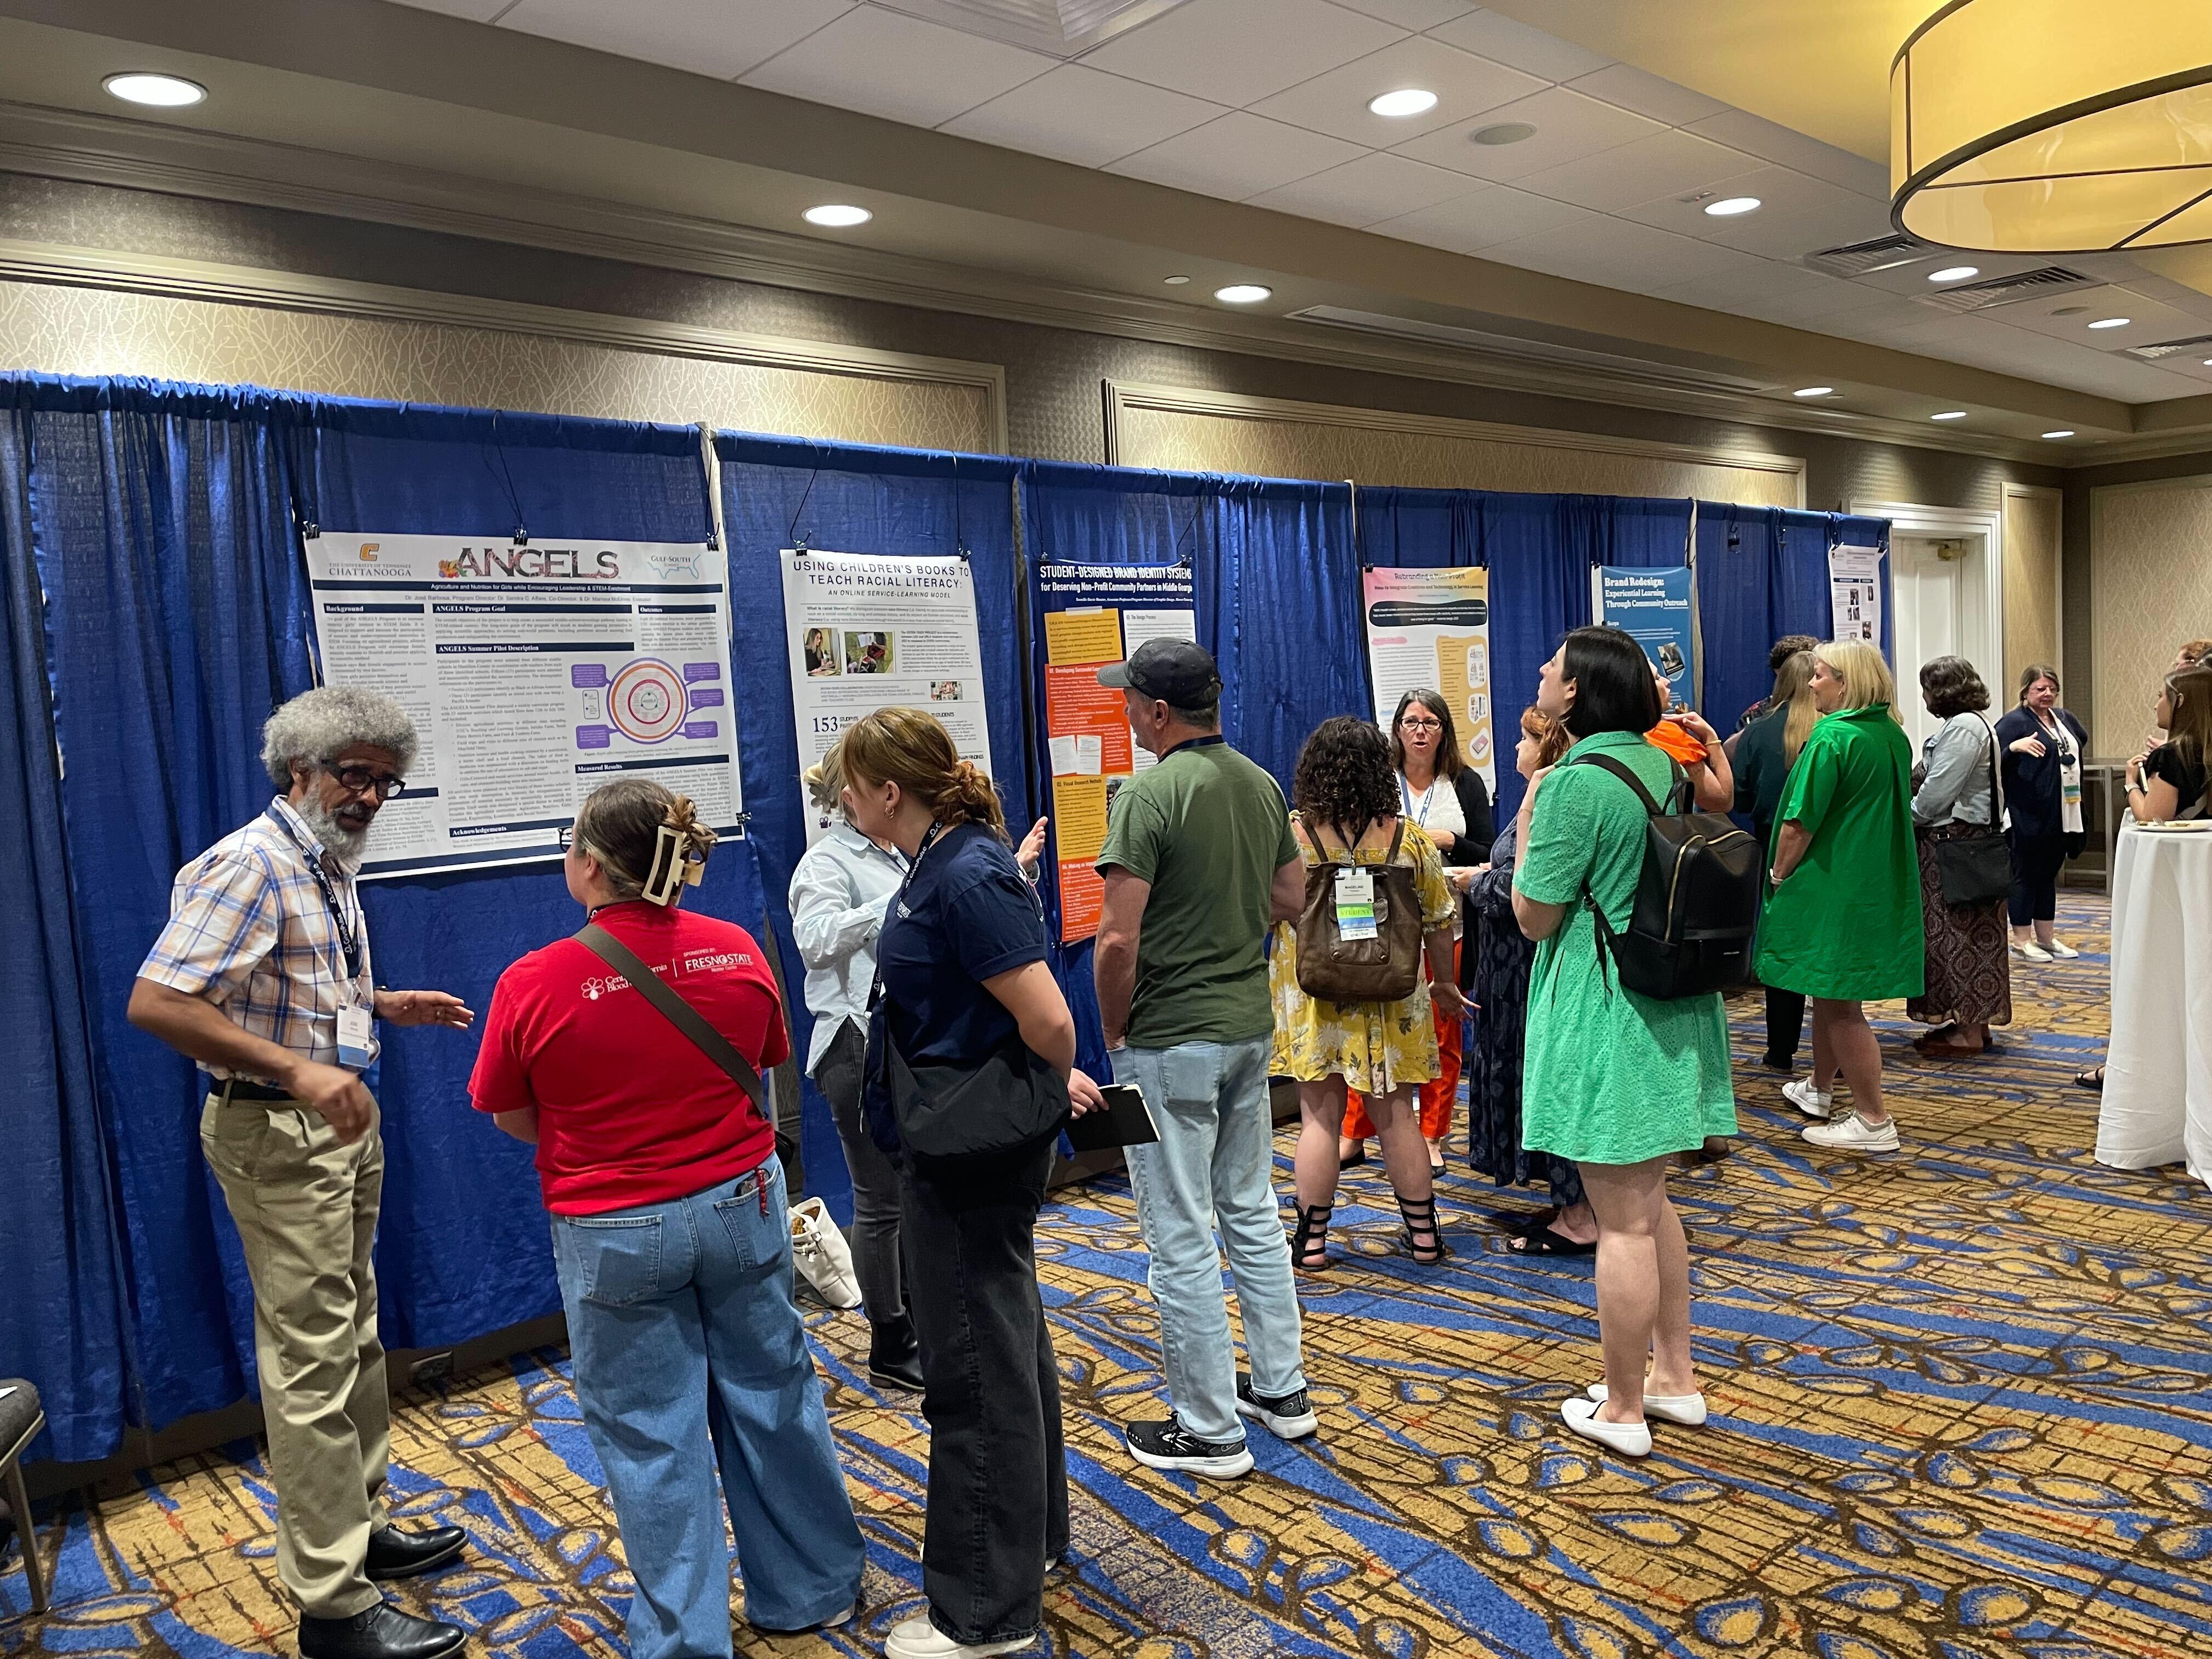 People walking around the exhibit hall at the Gulf South Summit conference looking at presentation posters